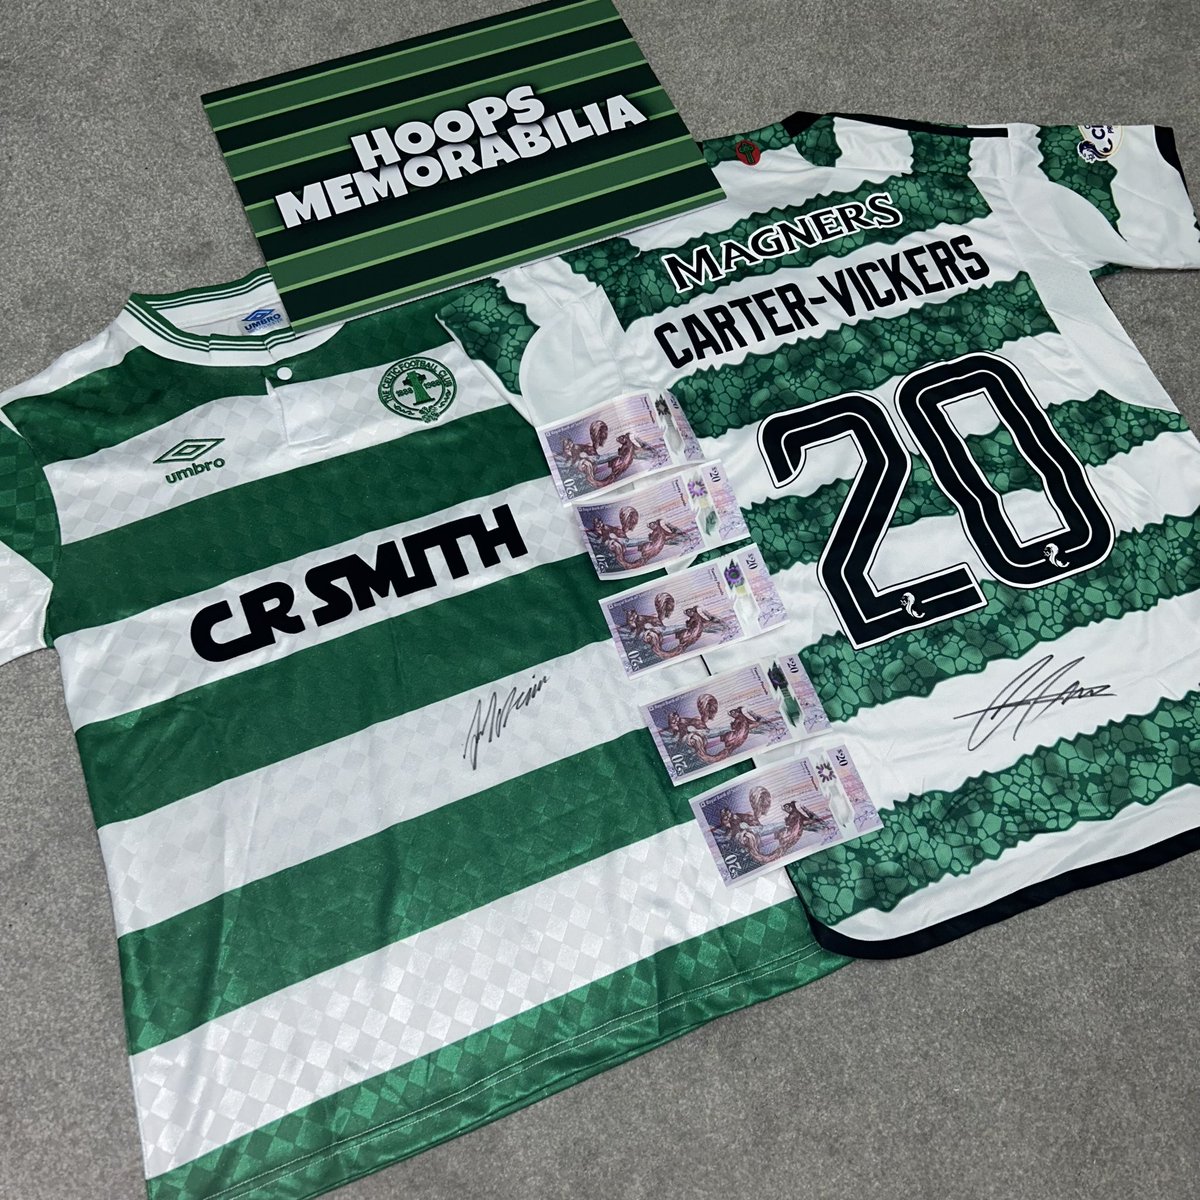 💚 HOOPS MEMORABILIA GIVEAWAY 🎉 For your chance to win a signed CCV shirt, a signed McAvennie 1988 shirt and £100 - Follow @hoopsmemorabili and @hoopsraffles ✅ - Tag 3 friends in replies ✅ - Retweet tweet ✅ Winner will be announced on 30th April at 9pm. Good luck! 🤞